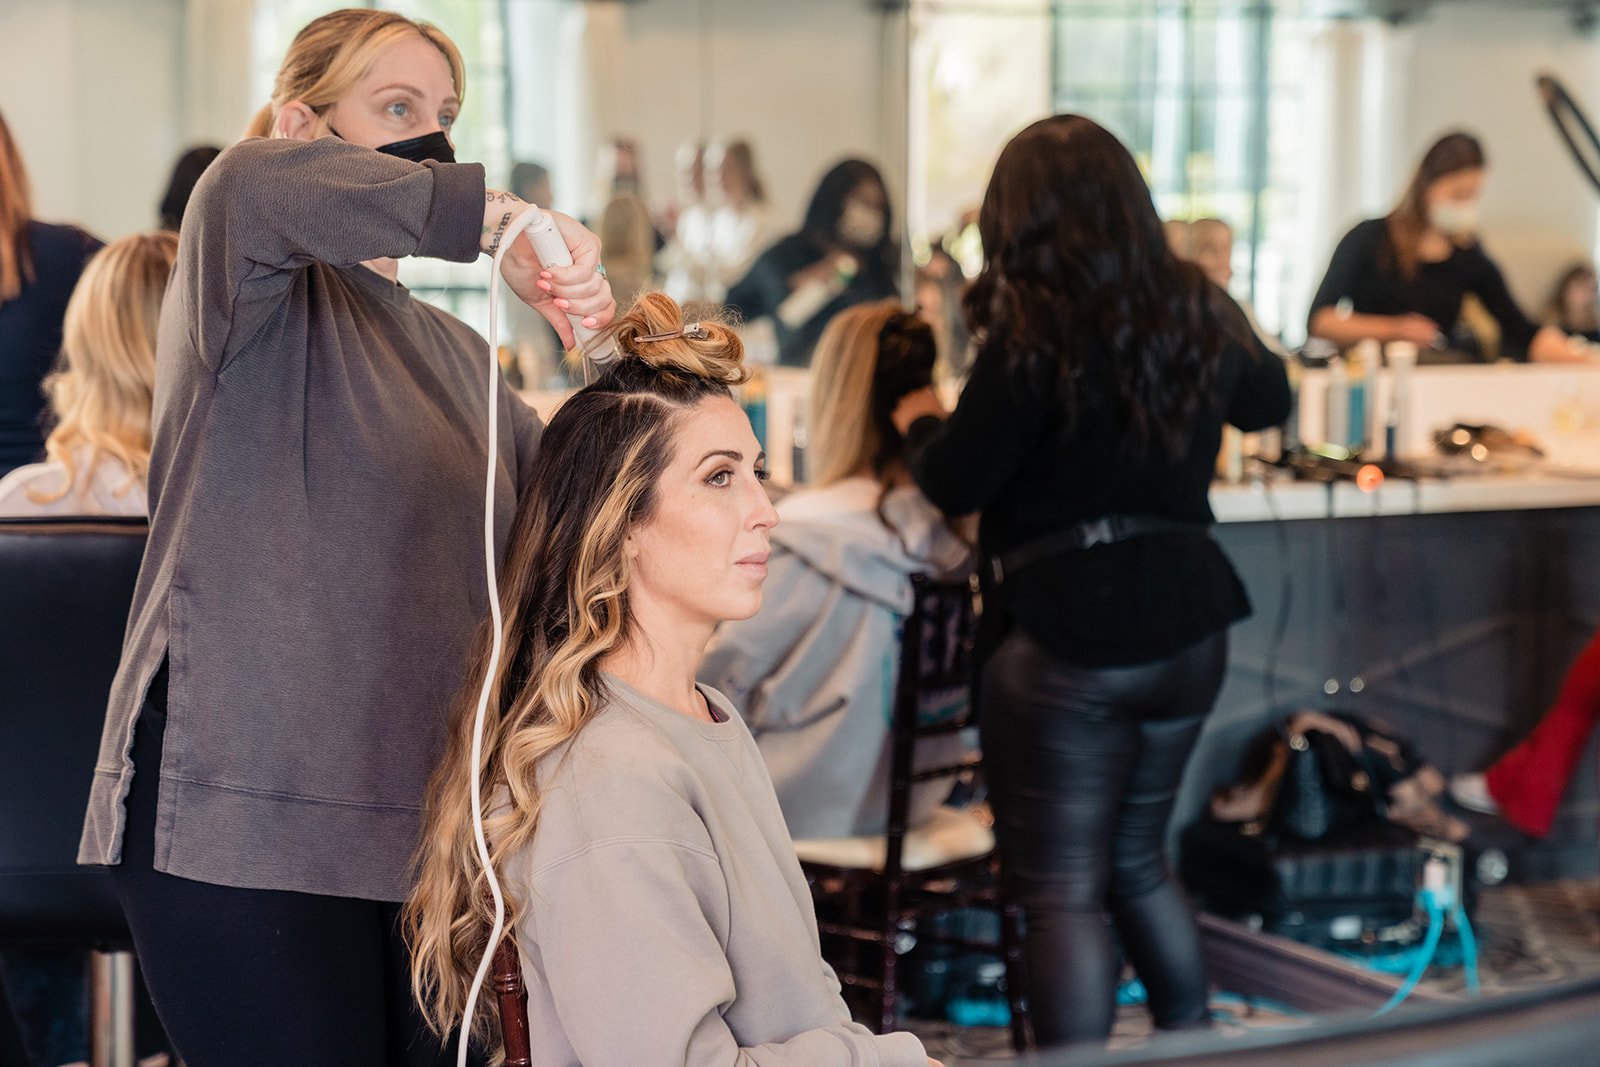 hair stylist creates boho and elegant hairstyle for wedding party at bel air bay club in pacific palisades